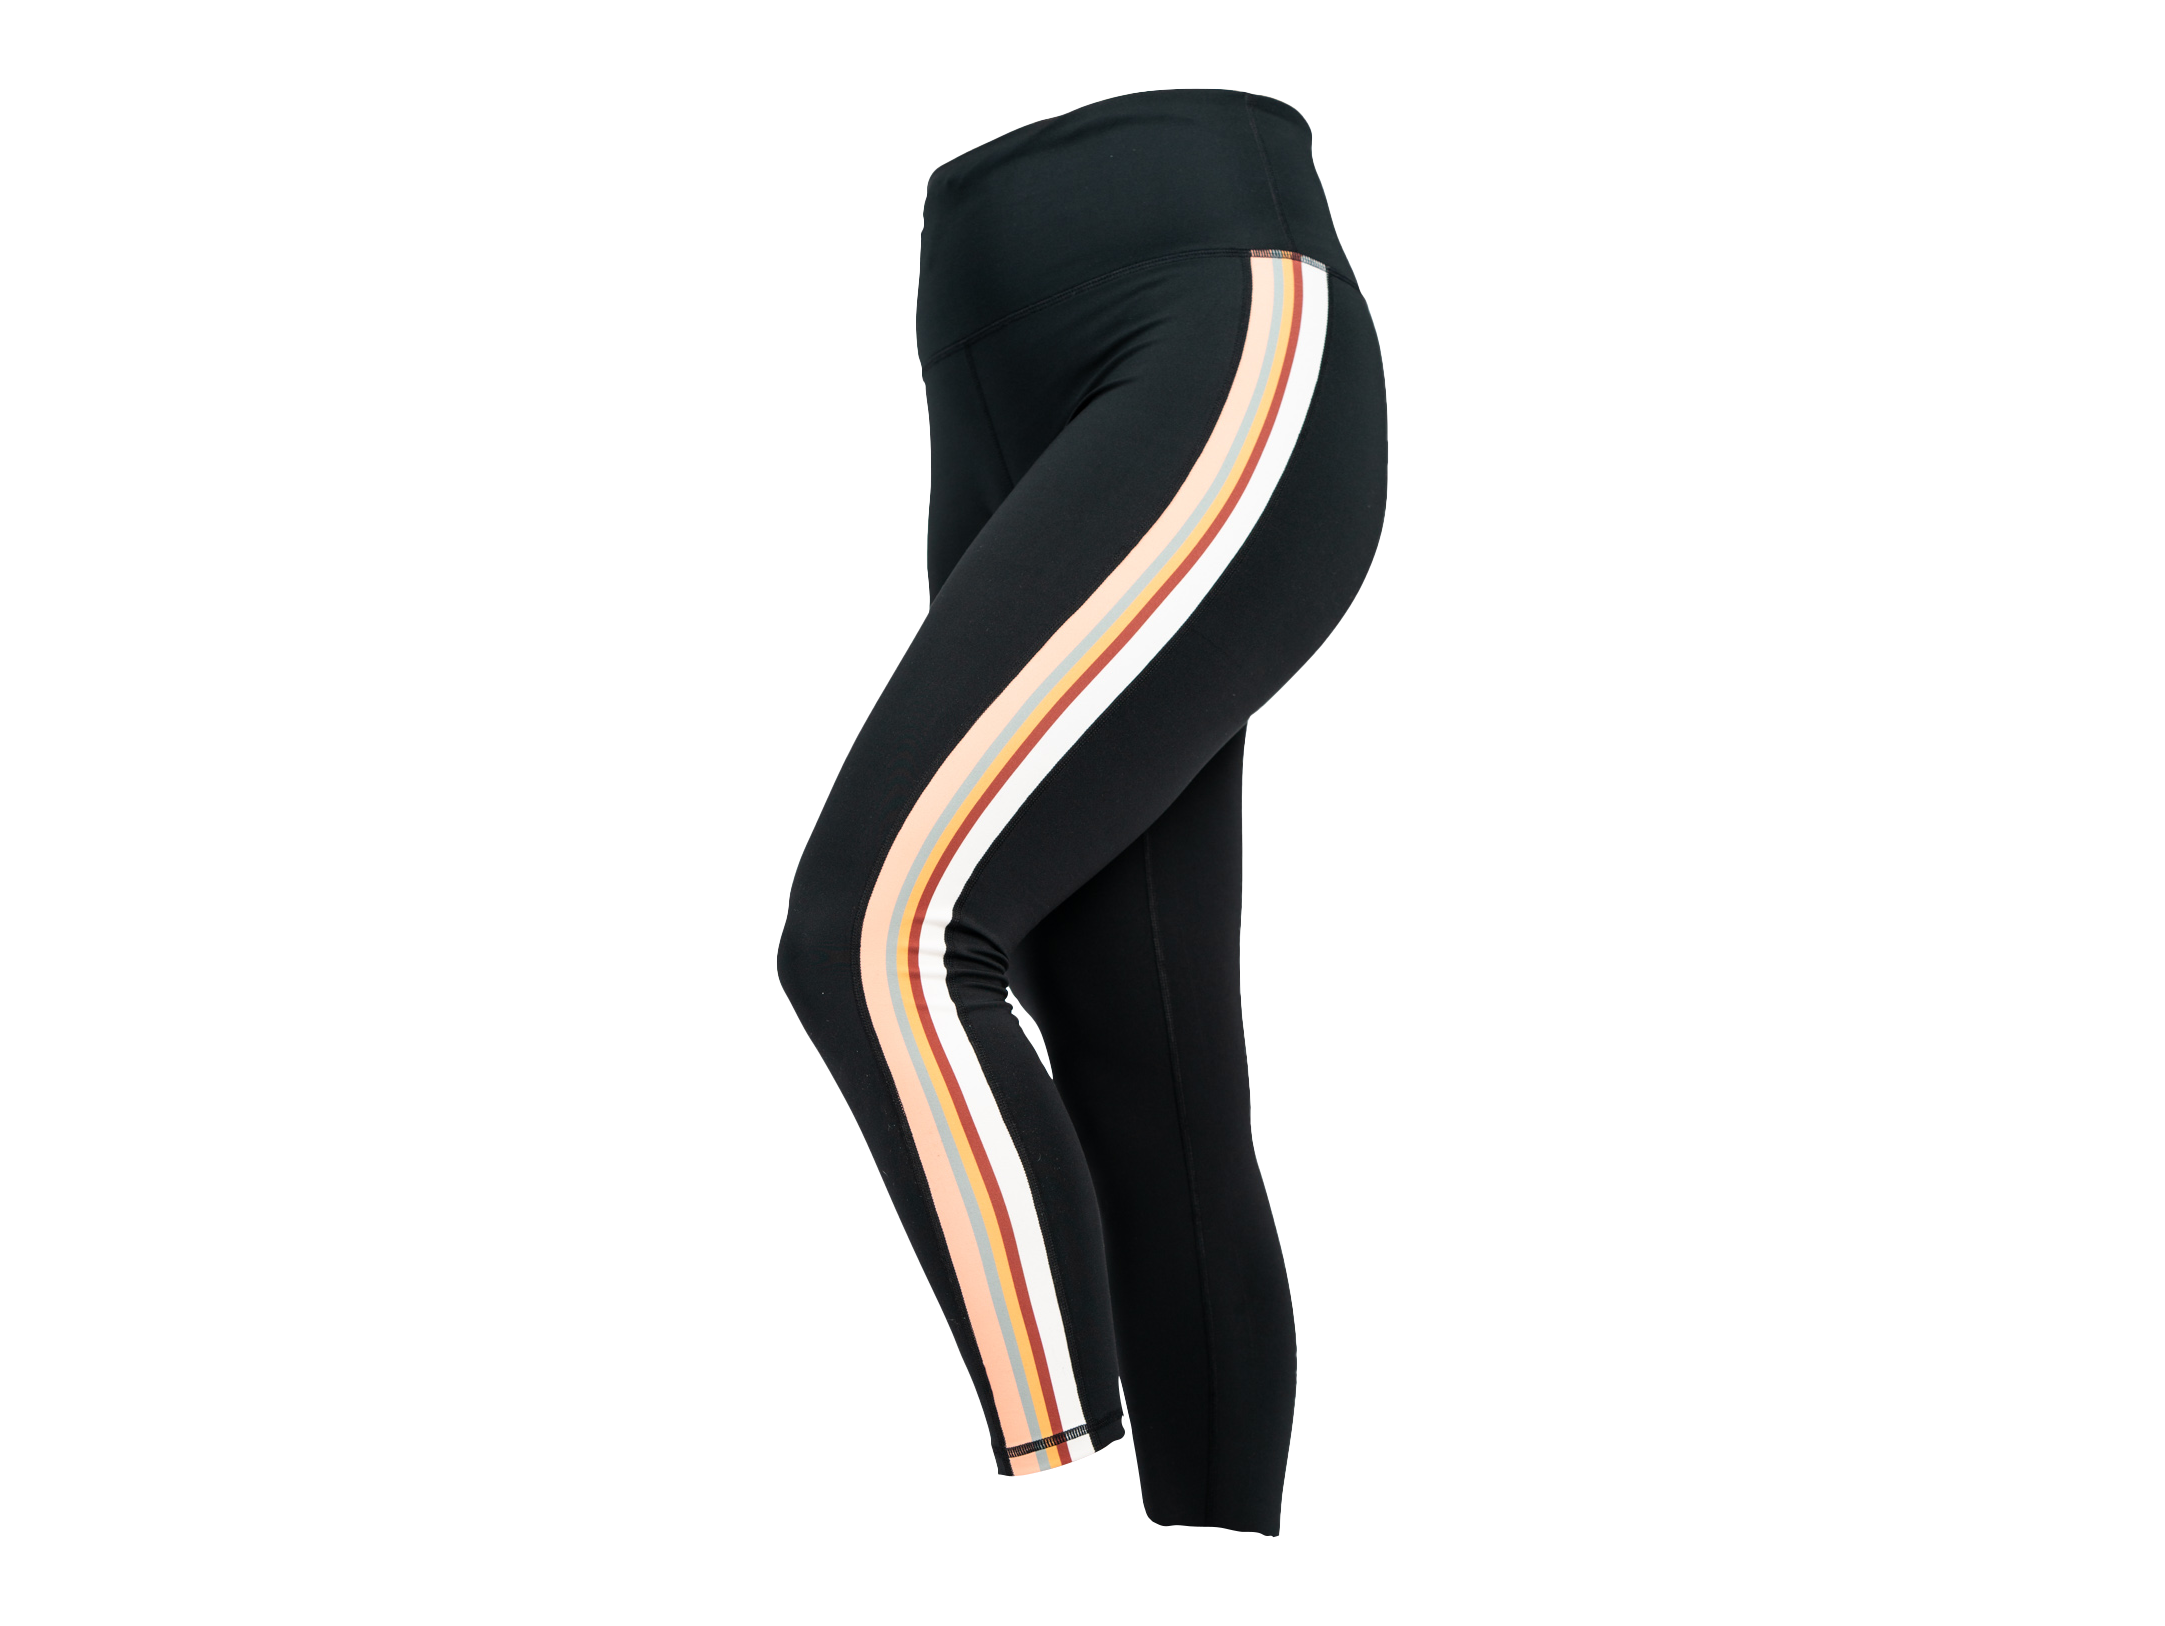 Routine Legging in Eco Bounce in Bean Made From Recycled Materials